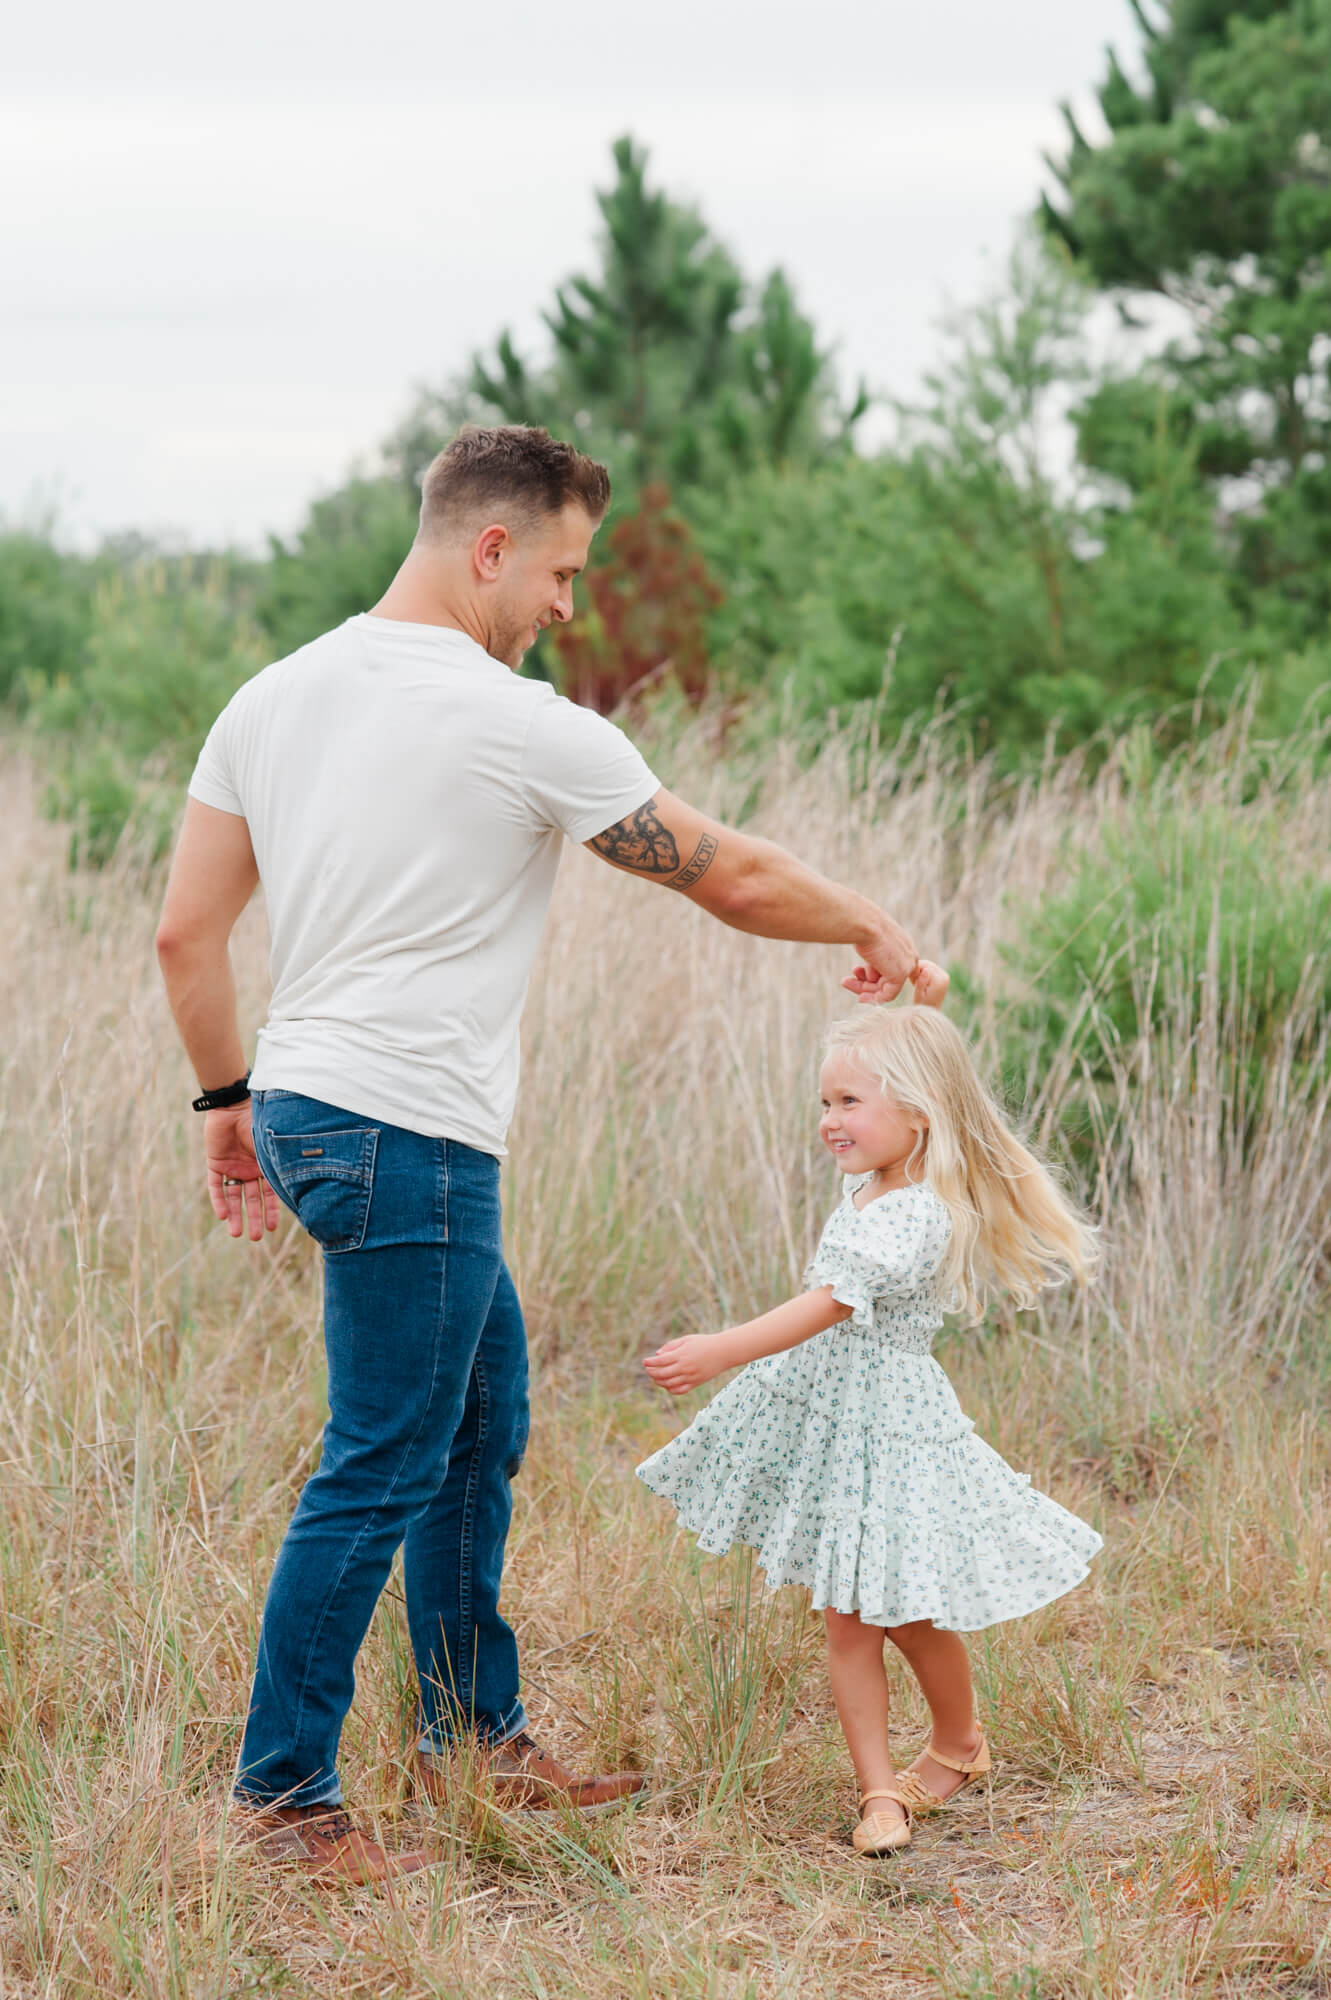 Dad dancing and twirling daughter in a tall grass field during their family session wearing greens and neutrals.